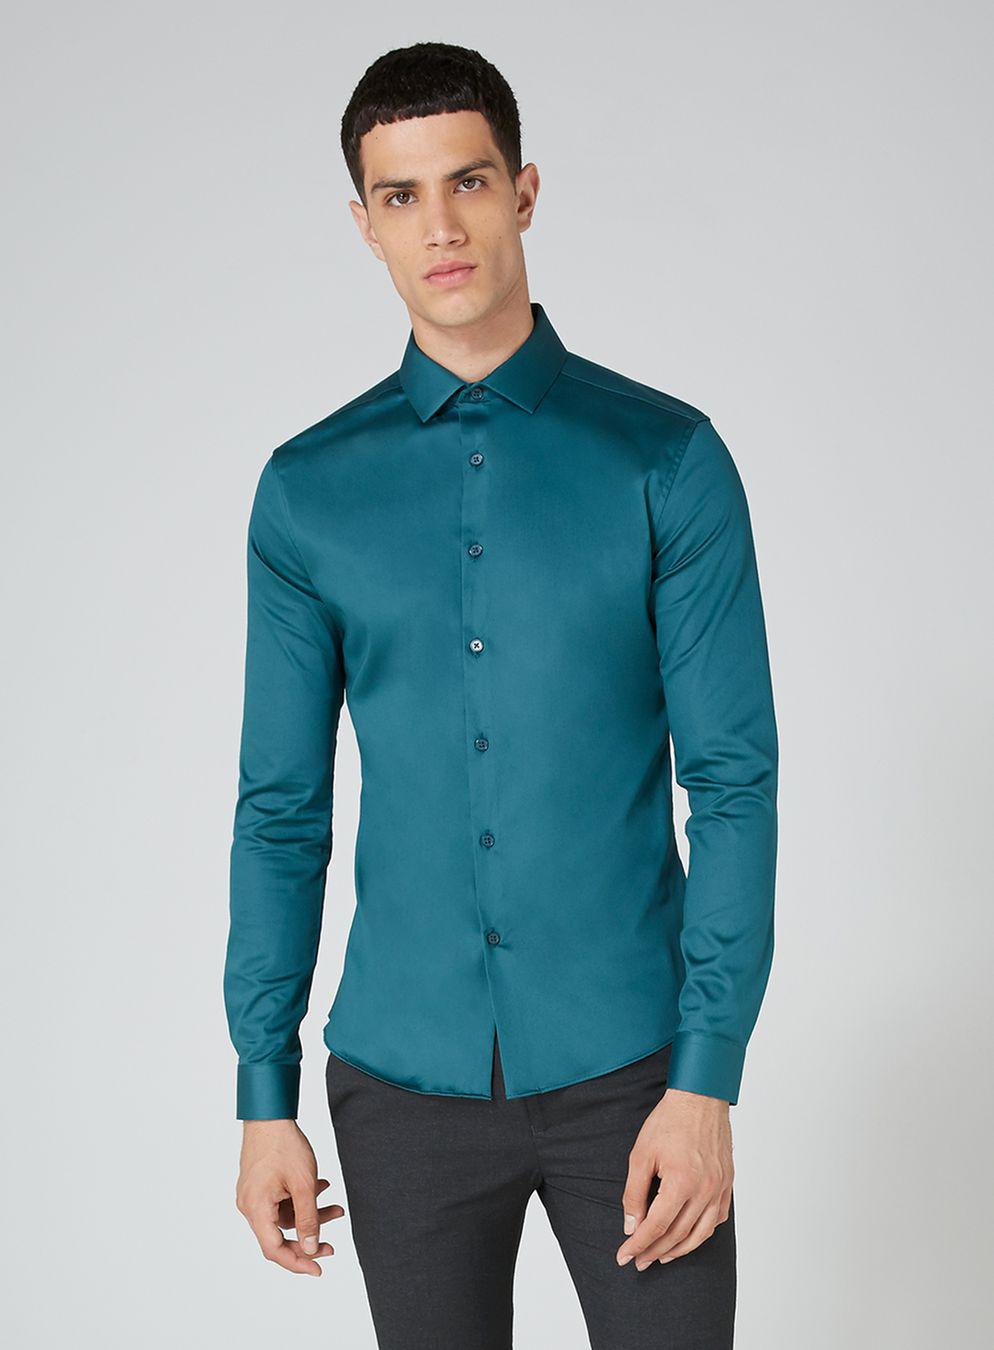 TOPMAN Teal Satin Muscle Fit Shirt in Blue for Men - Lyst